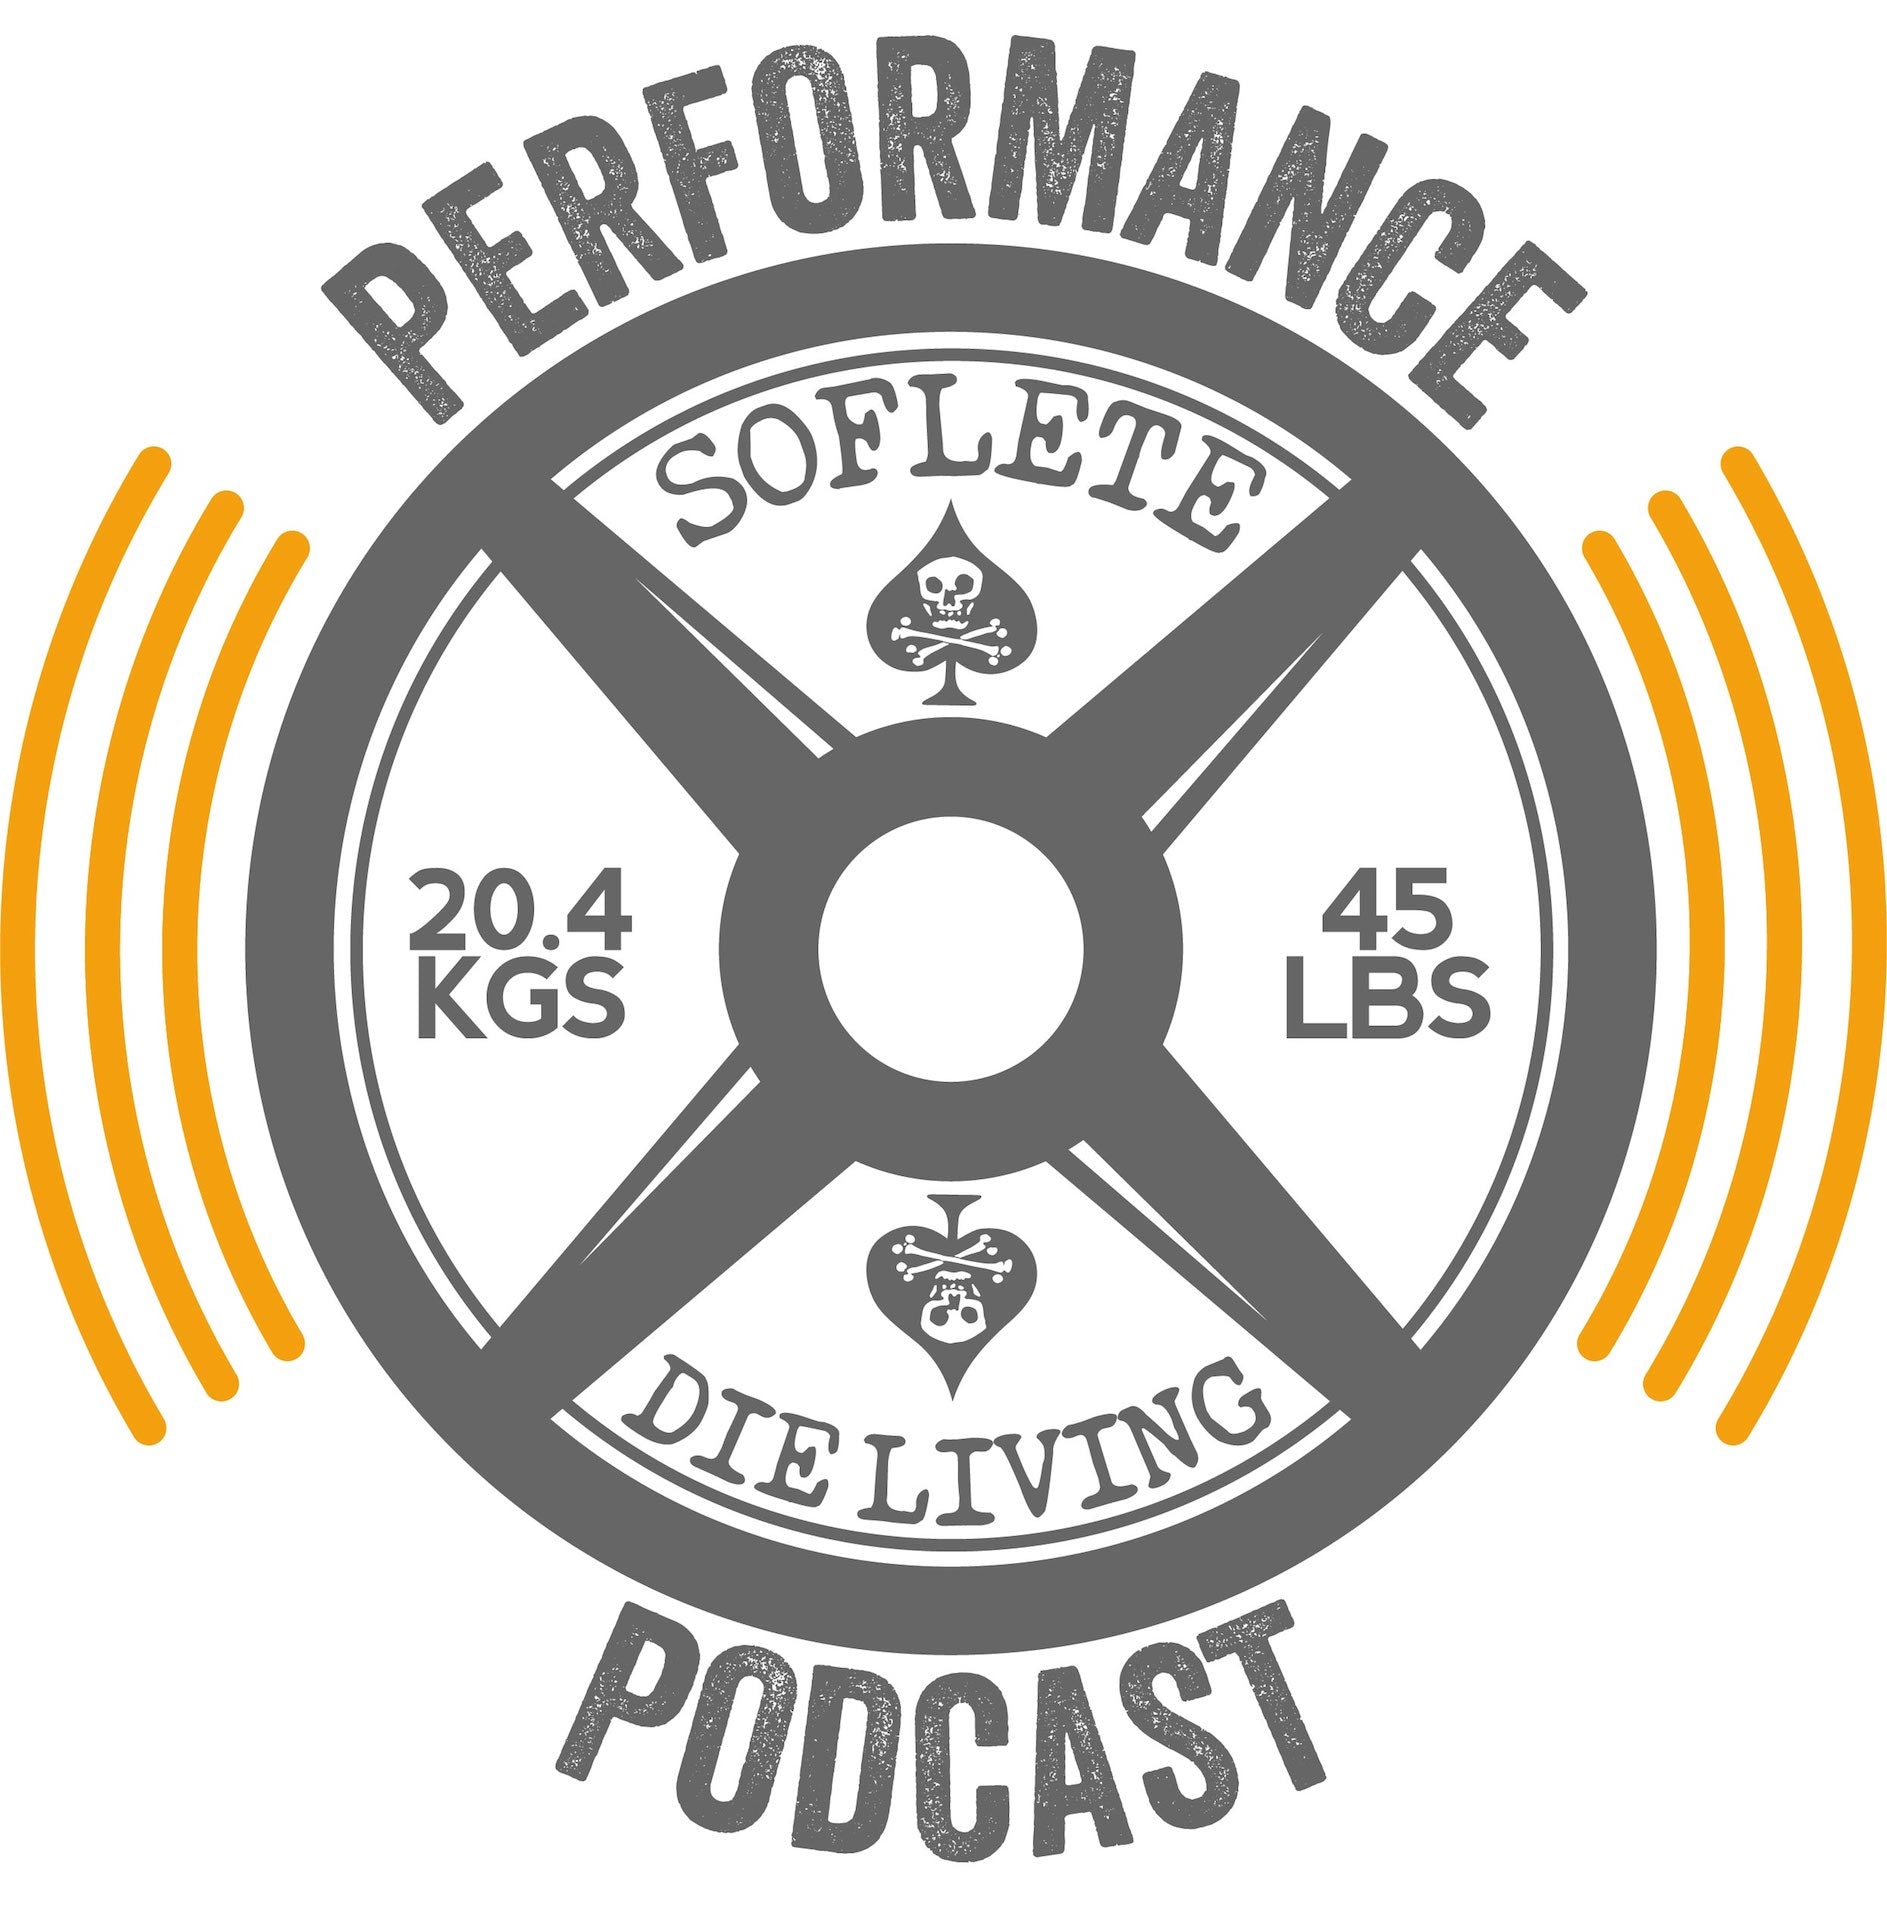 PERFORMANCE Podcast 18: New Year's Resolutions